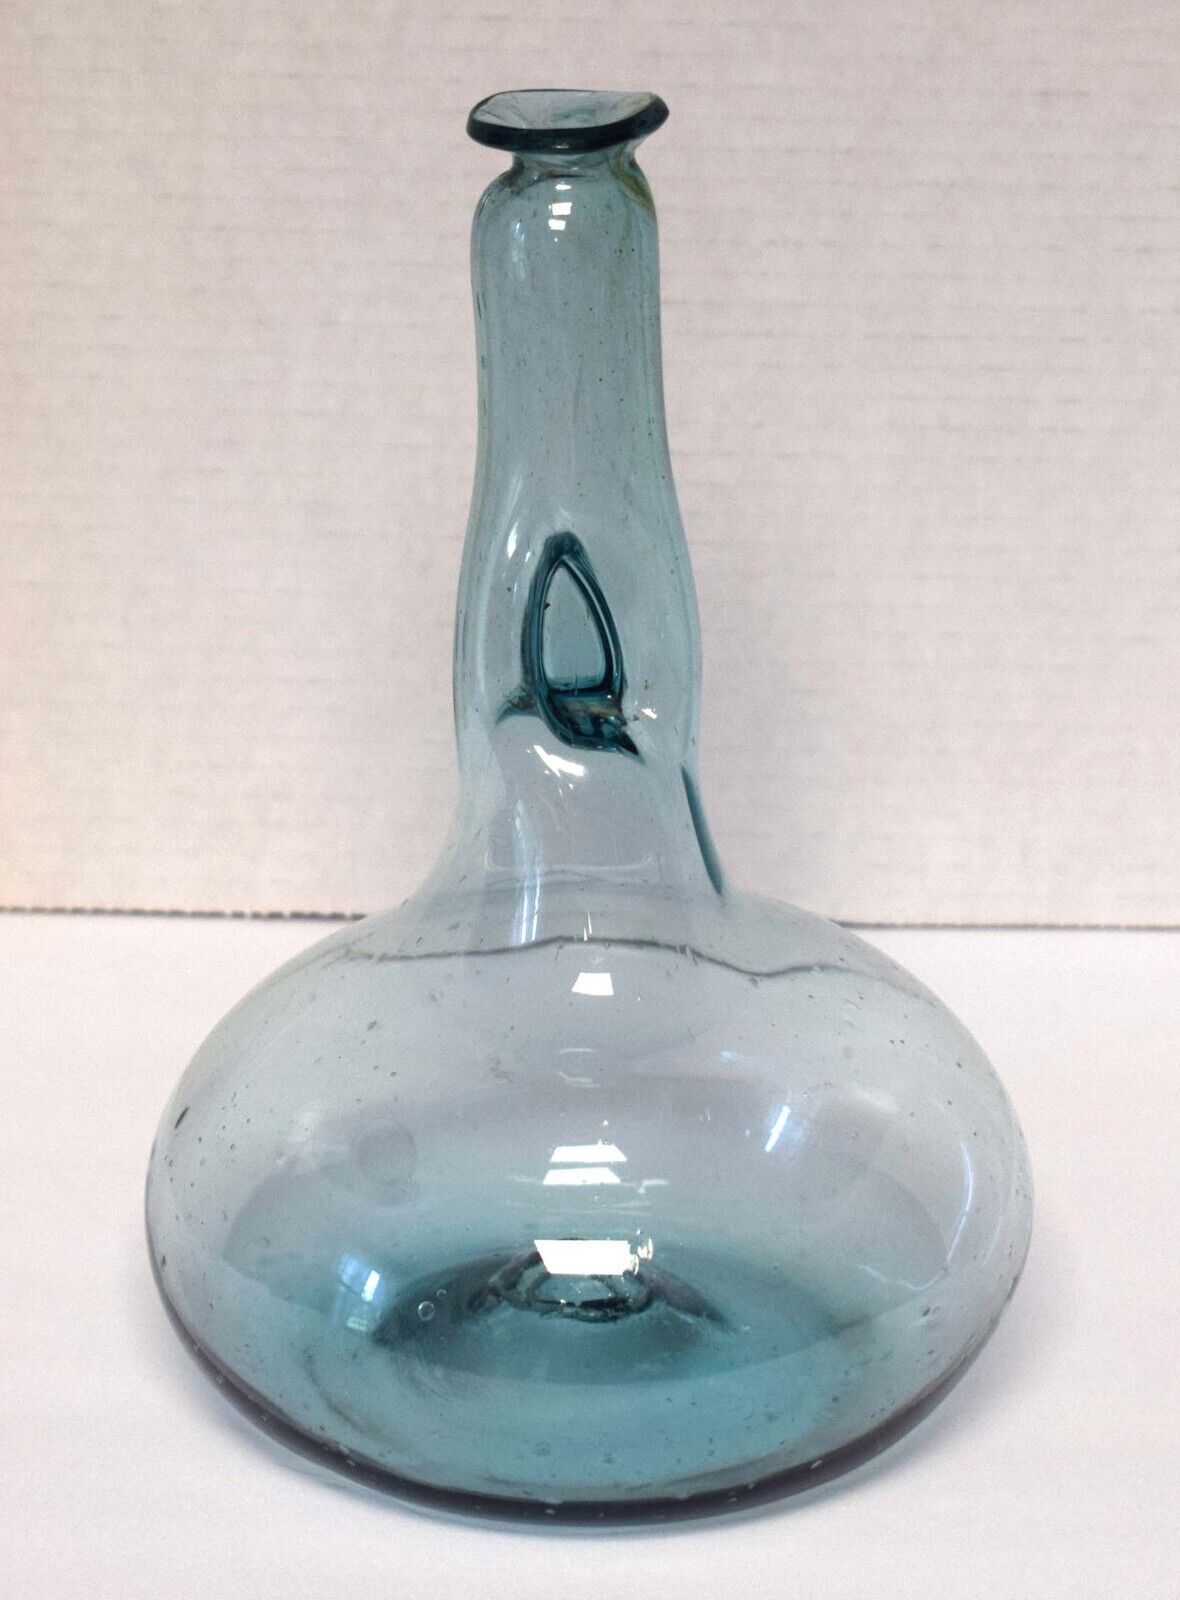 LATE 18th – EARLY 19th CENTURY BLOWN GLASS KUTTROLF BOTTLE  PRICE CUT 1/2